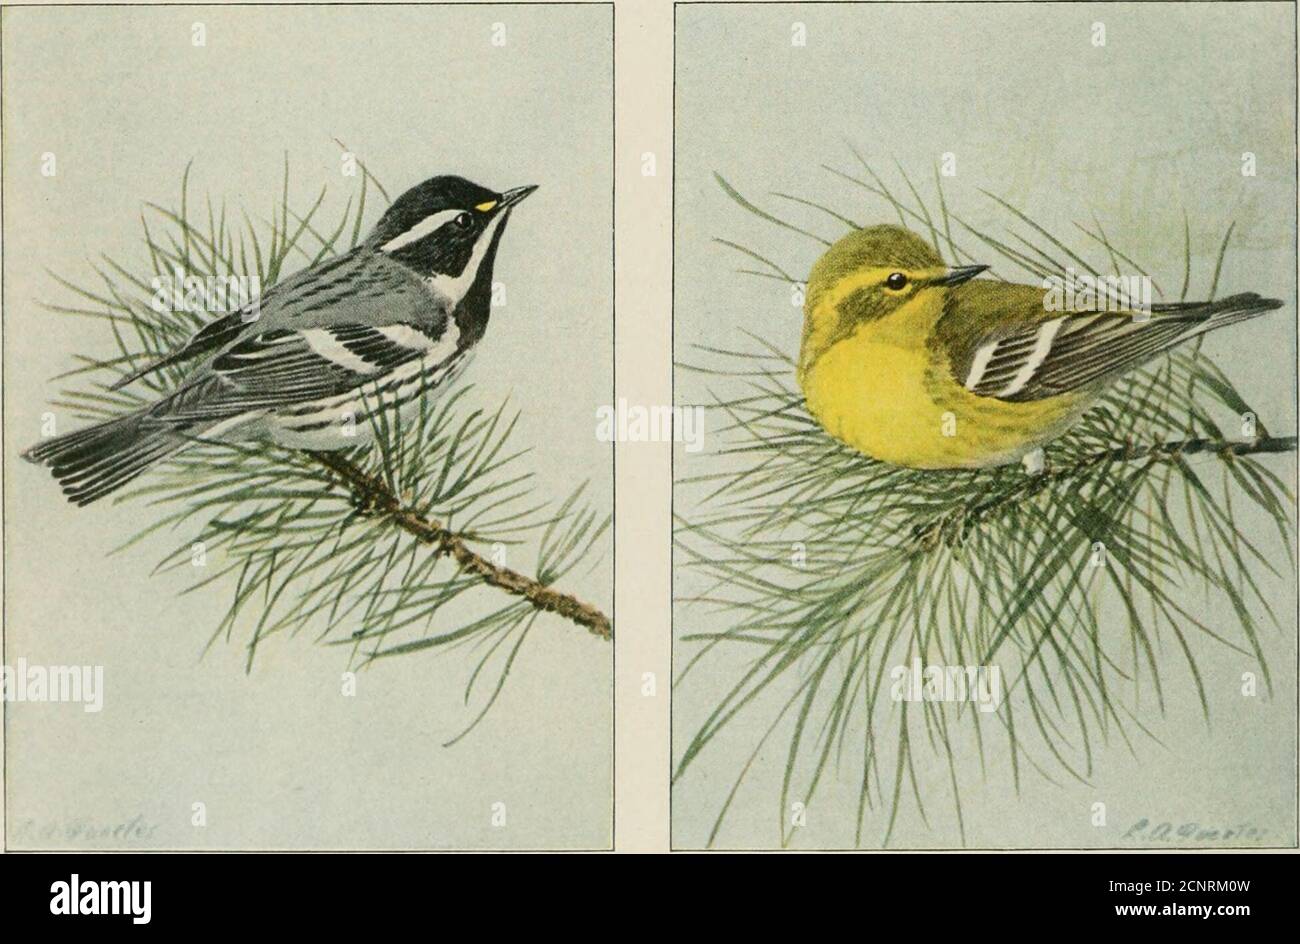 . The book of birds; common birds of town and country and American game birds . BAY-BREASTED WARBLER Male and Female BLACK-THROATED GREEN WARBLERMale and Female BLACK-THROATED GRAY WARBLER PINE WARBLER 92 Stock Photo